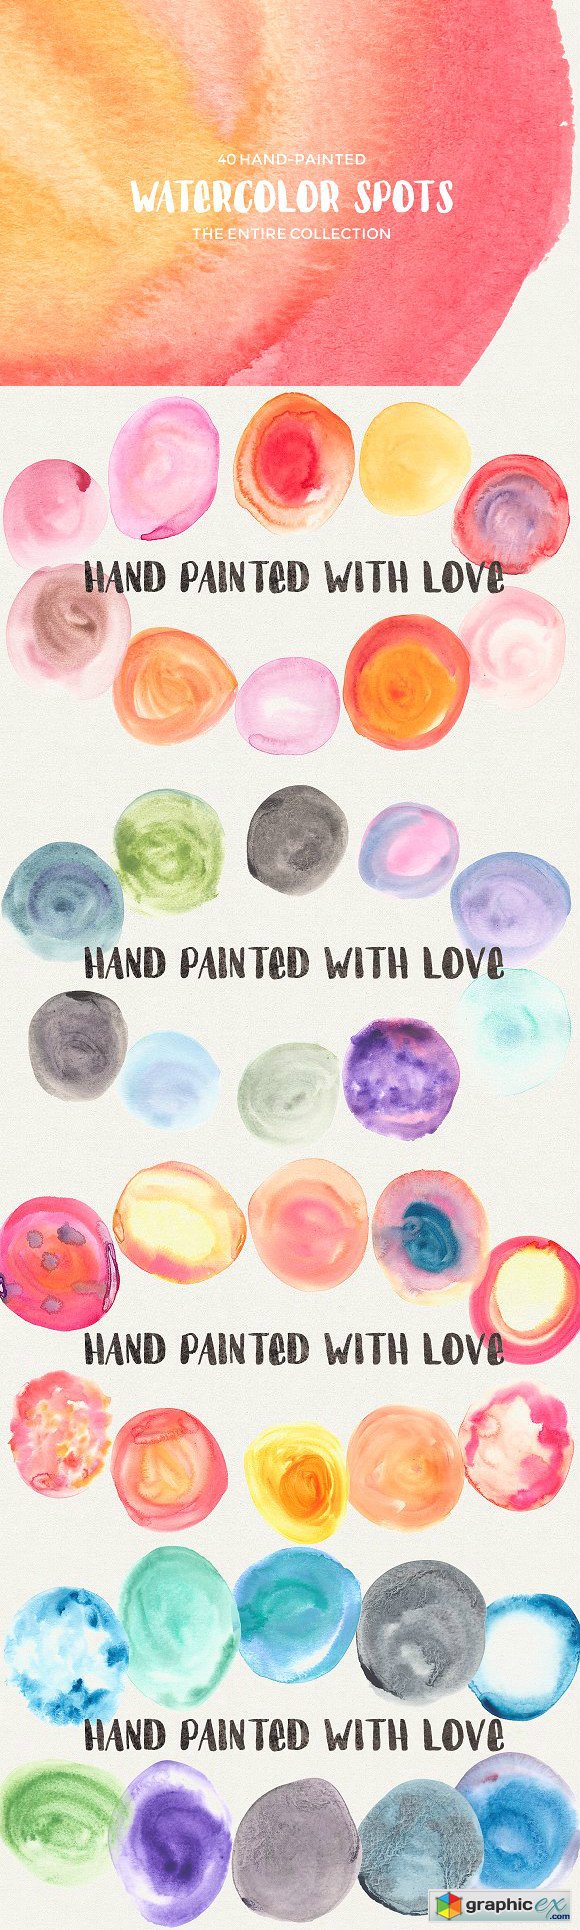 40 Hand-Painted Watercolor Spots